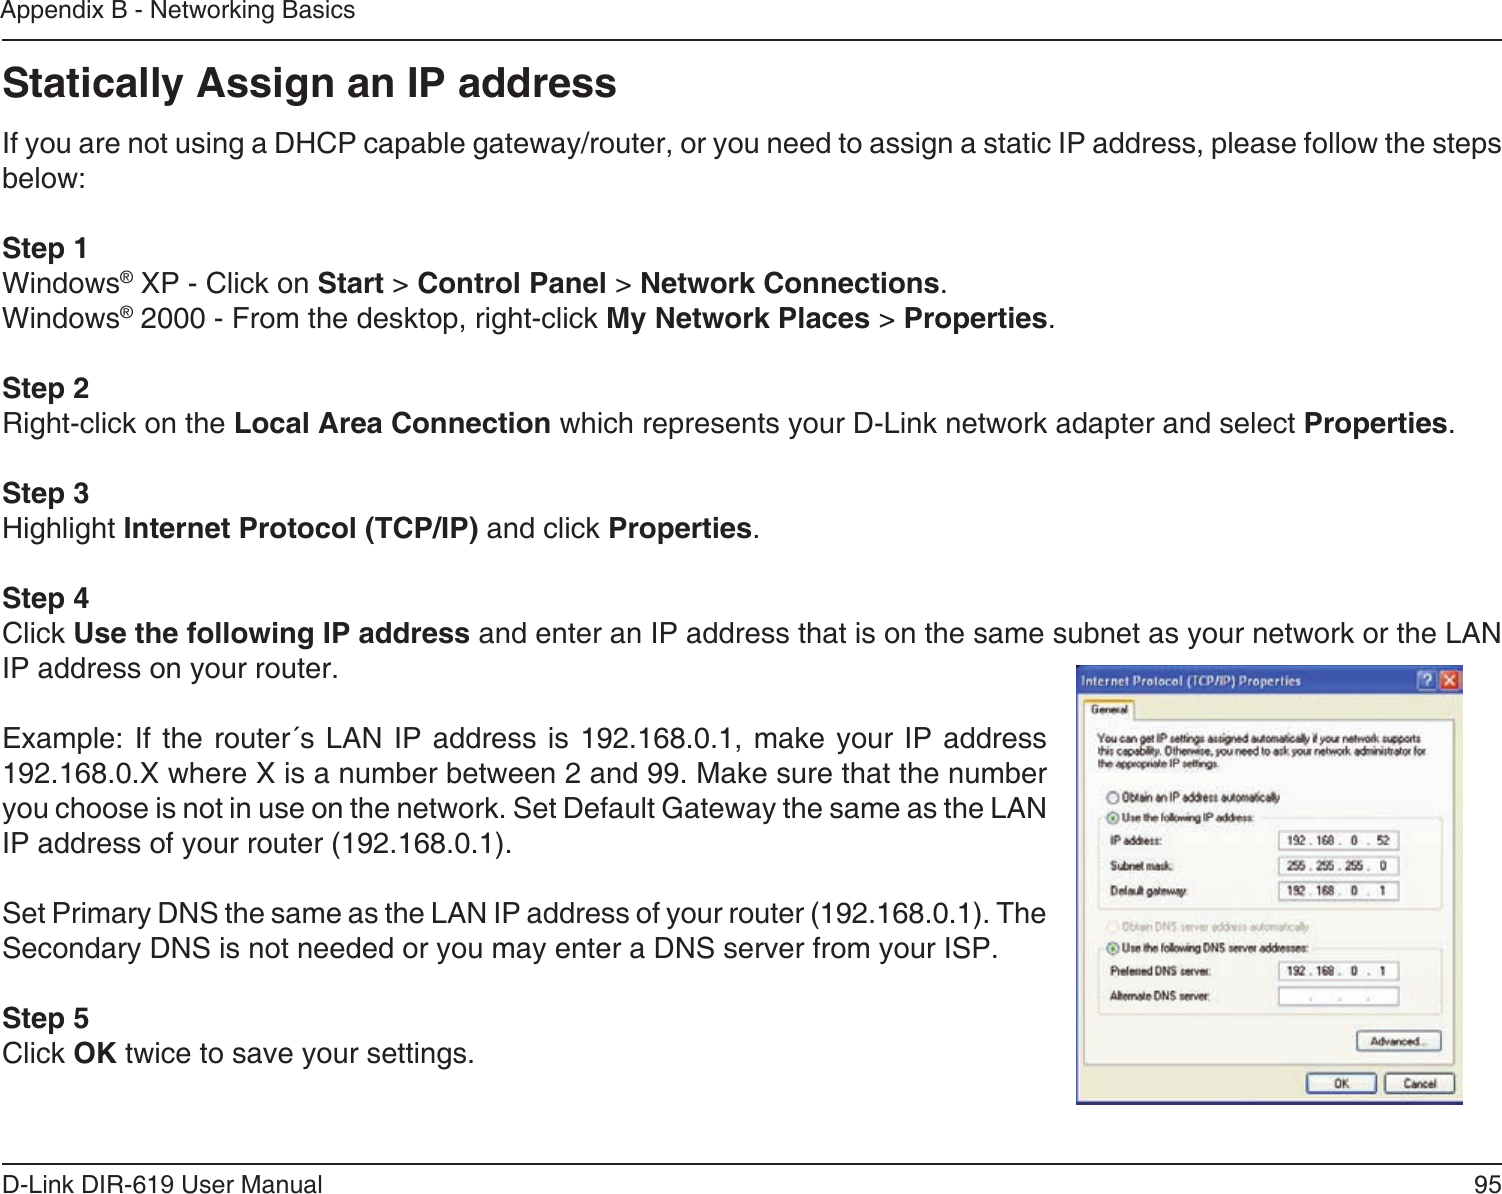 95D-Link DIR-619 User ManualAppendix B - Networking BasicsStatically Assign an IP addressIf you are not using a DHCP capable gateway/router, or you need to assign a static IP address, please follow the steps below:Step 1Windows® XP - Click on Start &gt; Control Panel &gt; Network Connections.Windows® 2000 - From the desktop, right-click My Network Places &gt; Properties.Step 2Right-click on the Local Area Connection which represents your D-Link network adapter and select Properties.Step 3Highlight Internet Protocol (TCP/IP) and click Properties.Step 4Click Use the following IP address and enter an IP address that is on the same subnet as your network or the LANIP address on your router. Example: If the router´s LAN IP address is 192.168.0.1, make your IP address 192.168.0.X where X is a number between 2 and 99. Make sure that the numberyou choose is not in use on the network. Set Default Gateway the same as the LANIP address of your router (192.168.0.1). Set Primary DNS the same as the LAN IP address of your router (192.168.0.1). TheSecondary DNS is not needed or you may enter a DNS server from your ISP.Step 5Click OK twice to save your settings.